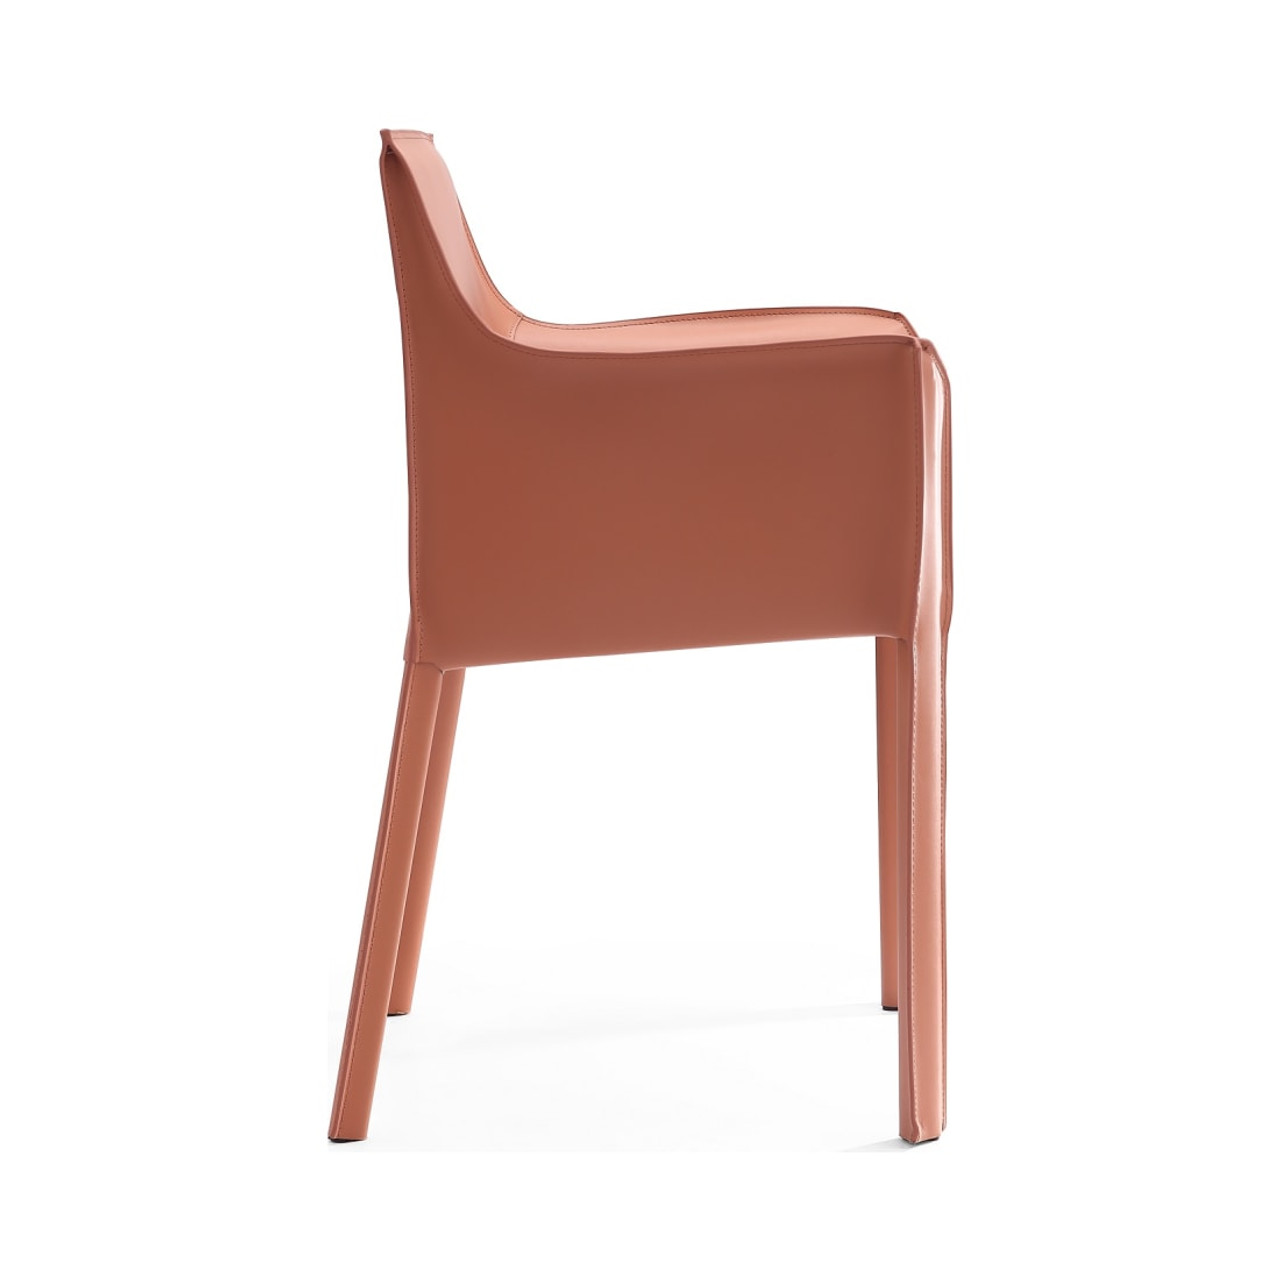 Vogue Arm Chair in Clay (Set of 2)